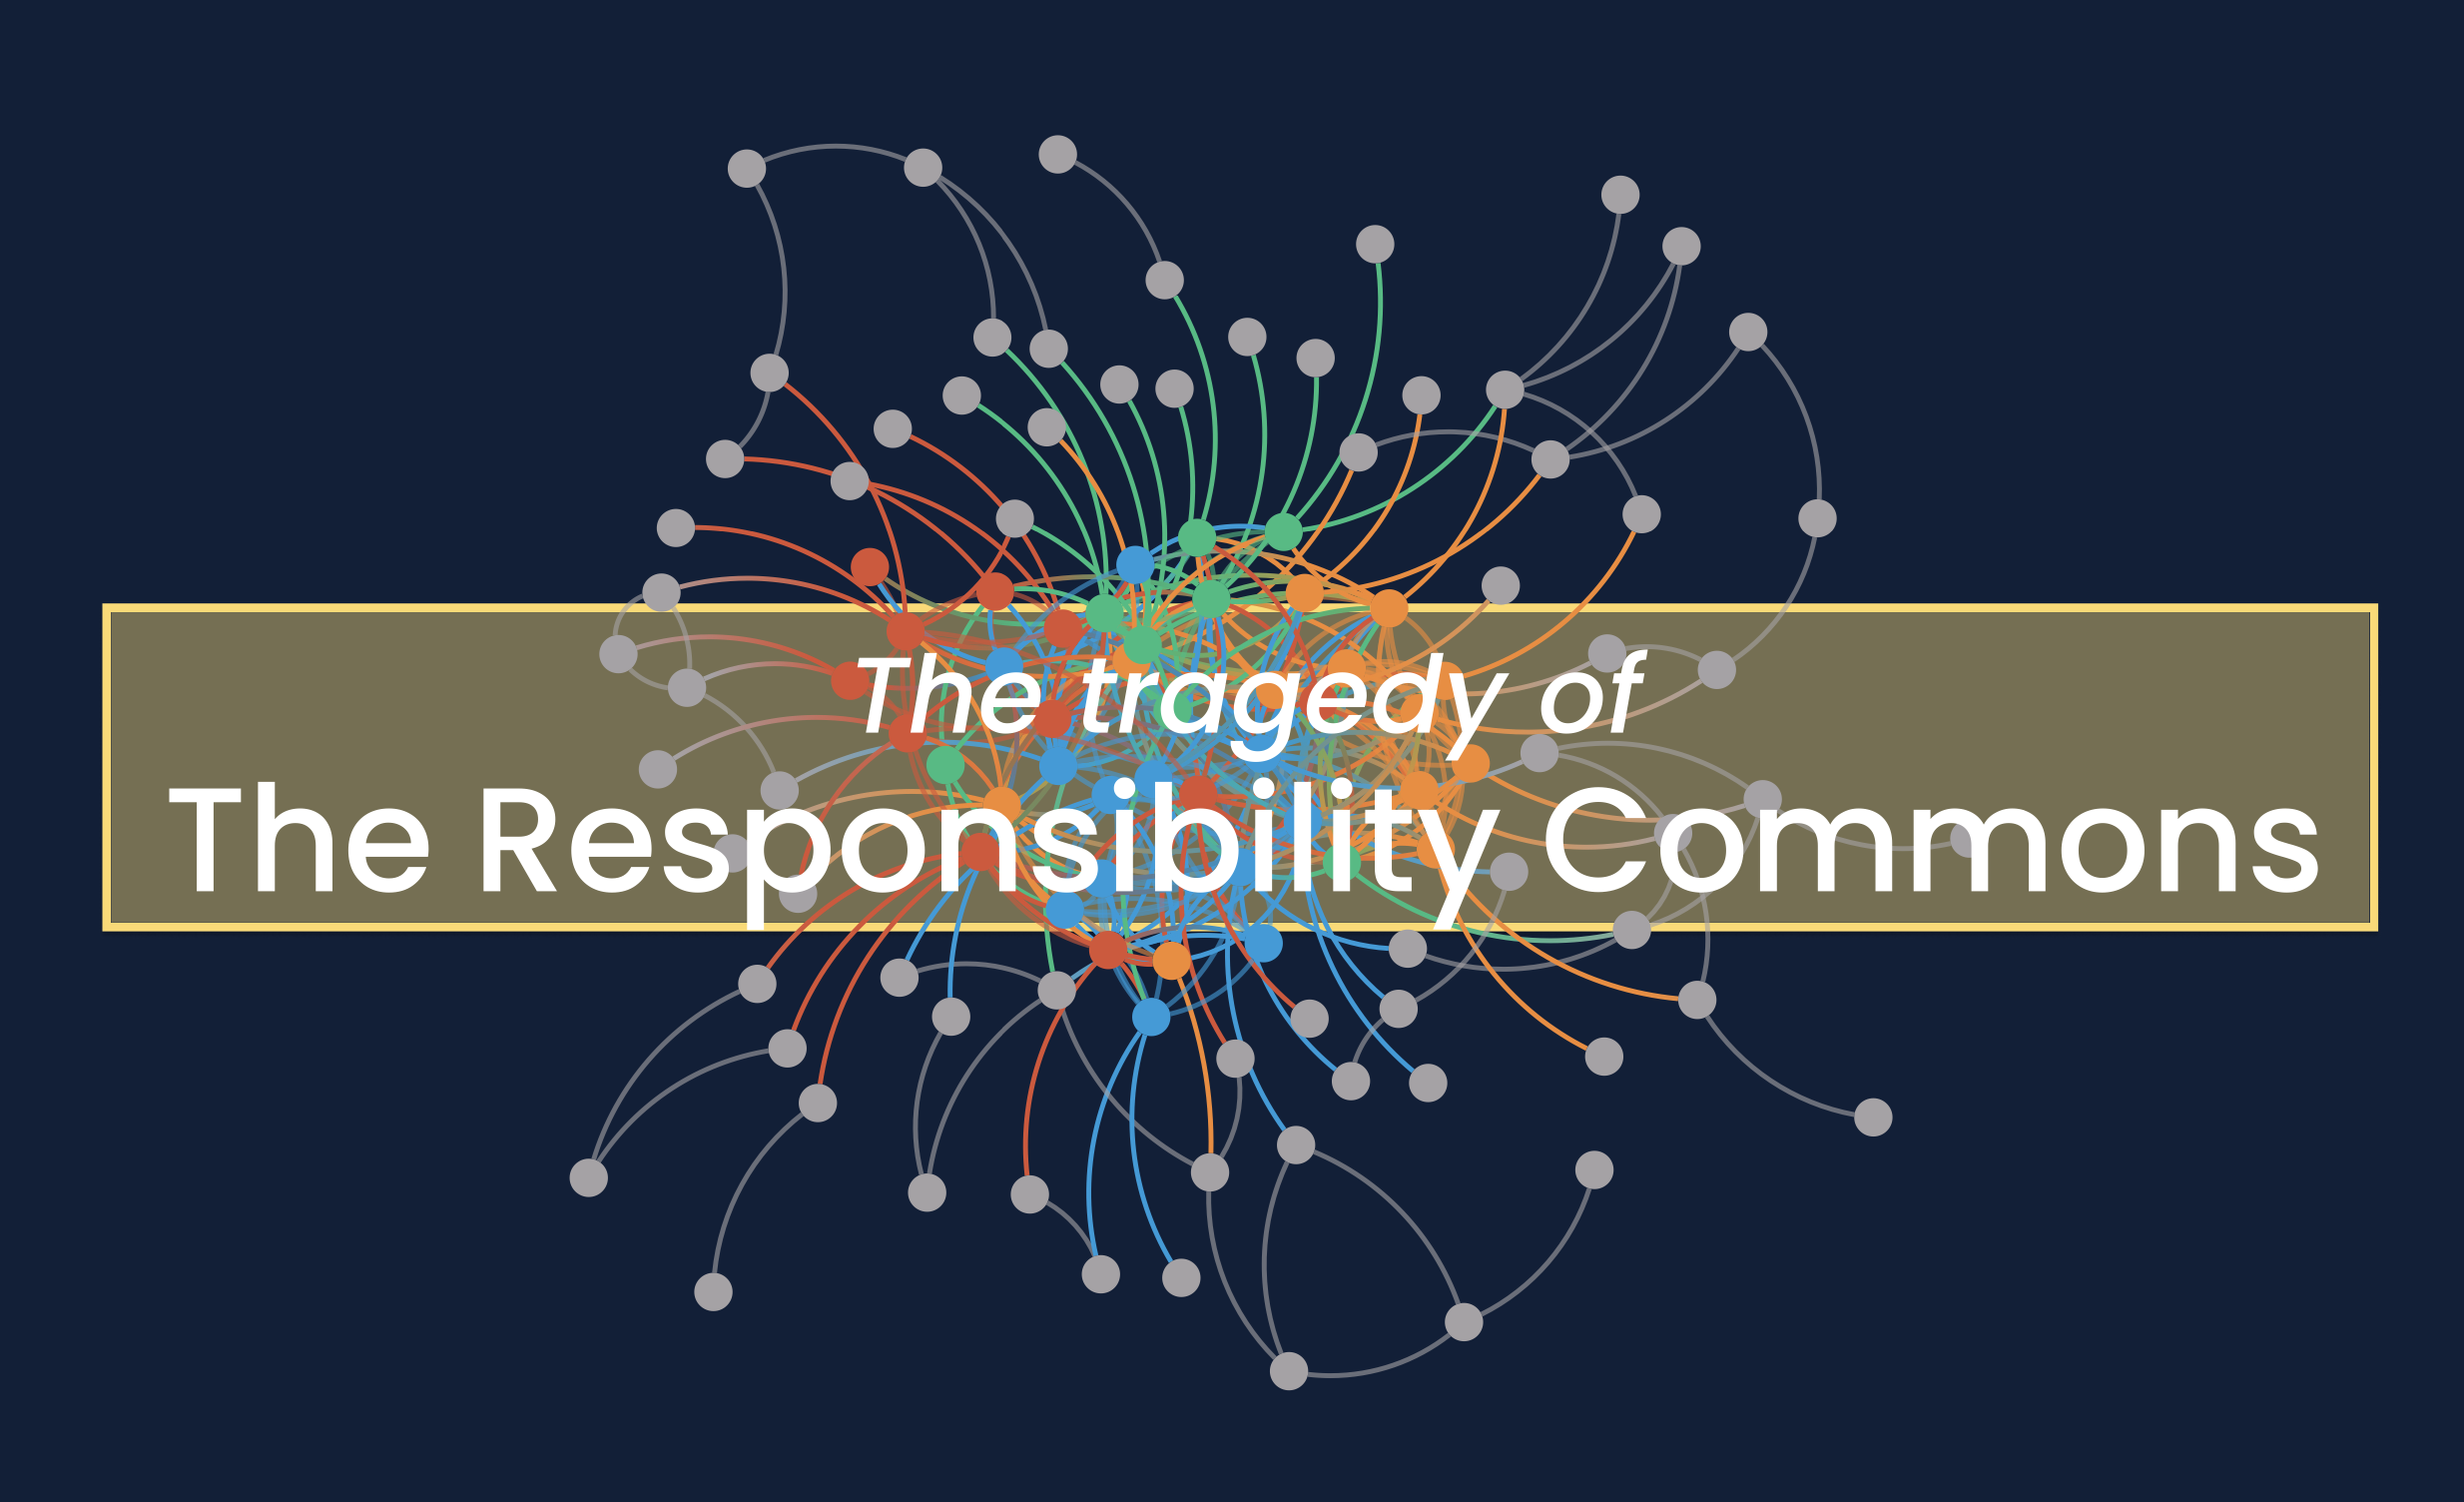 Non-hierarchical organizations fall prey to the tragedy of the responsibility commons